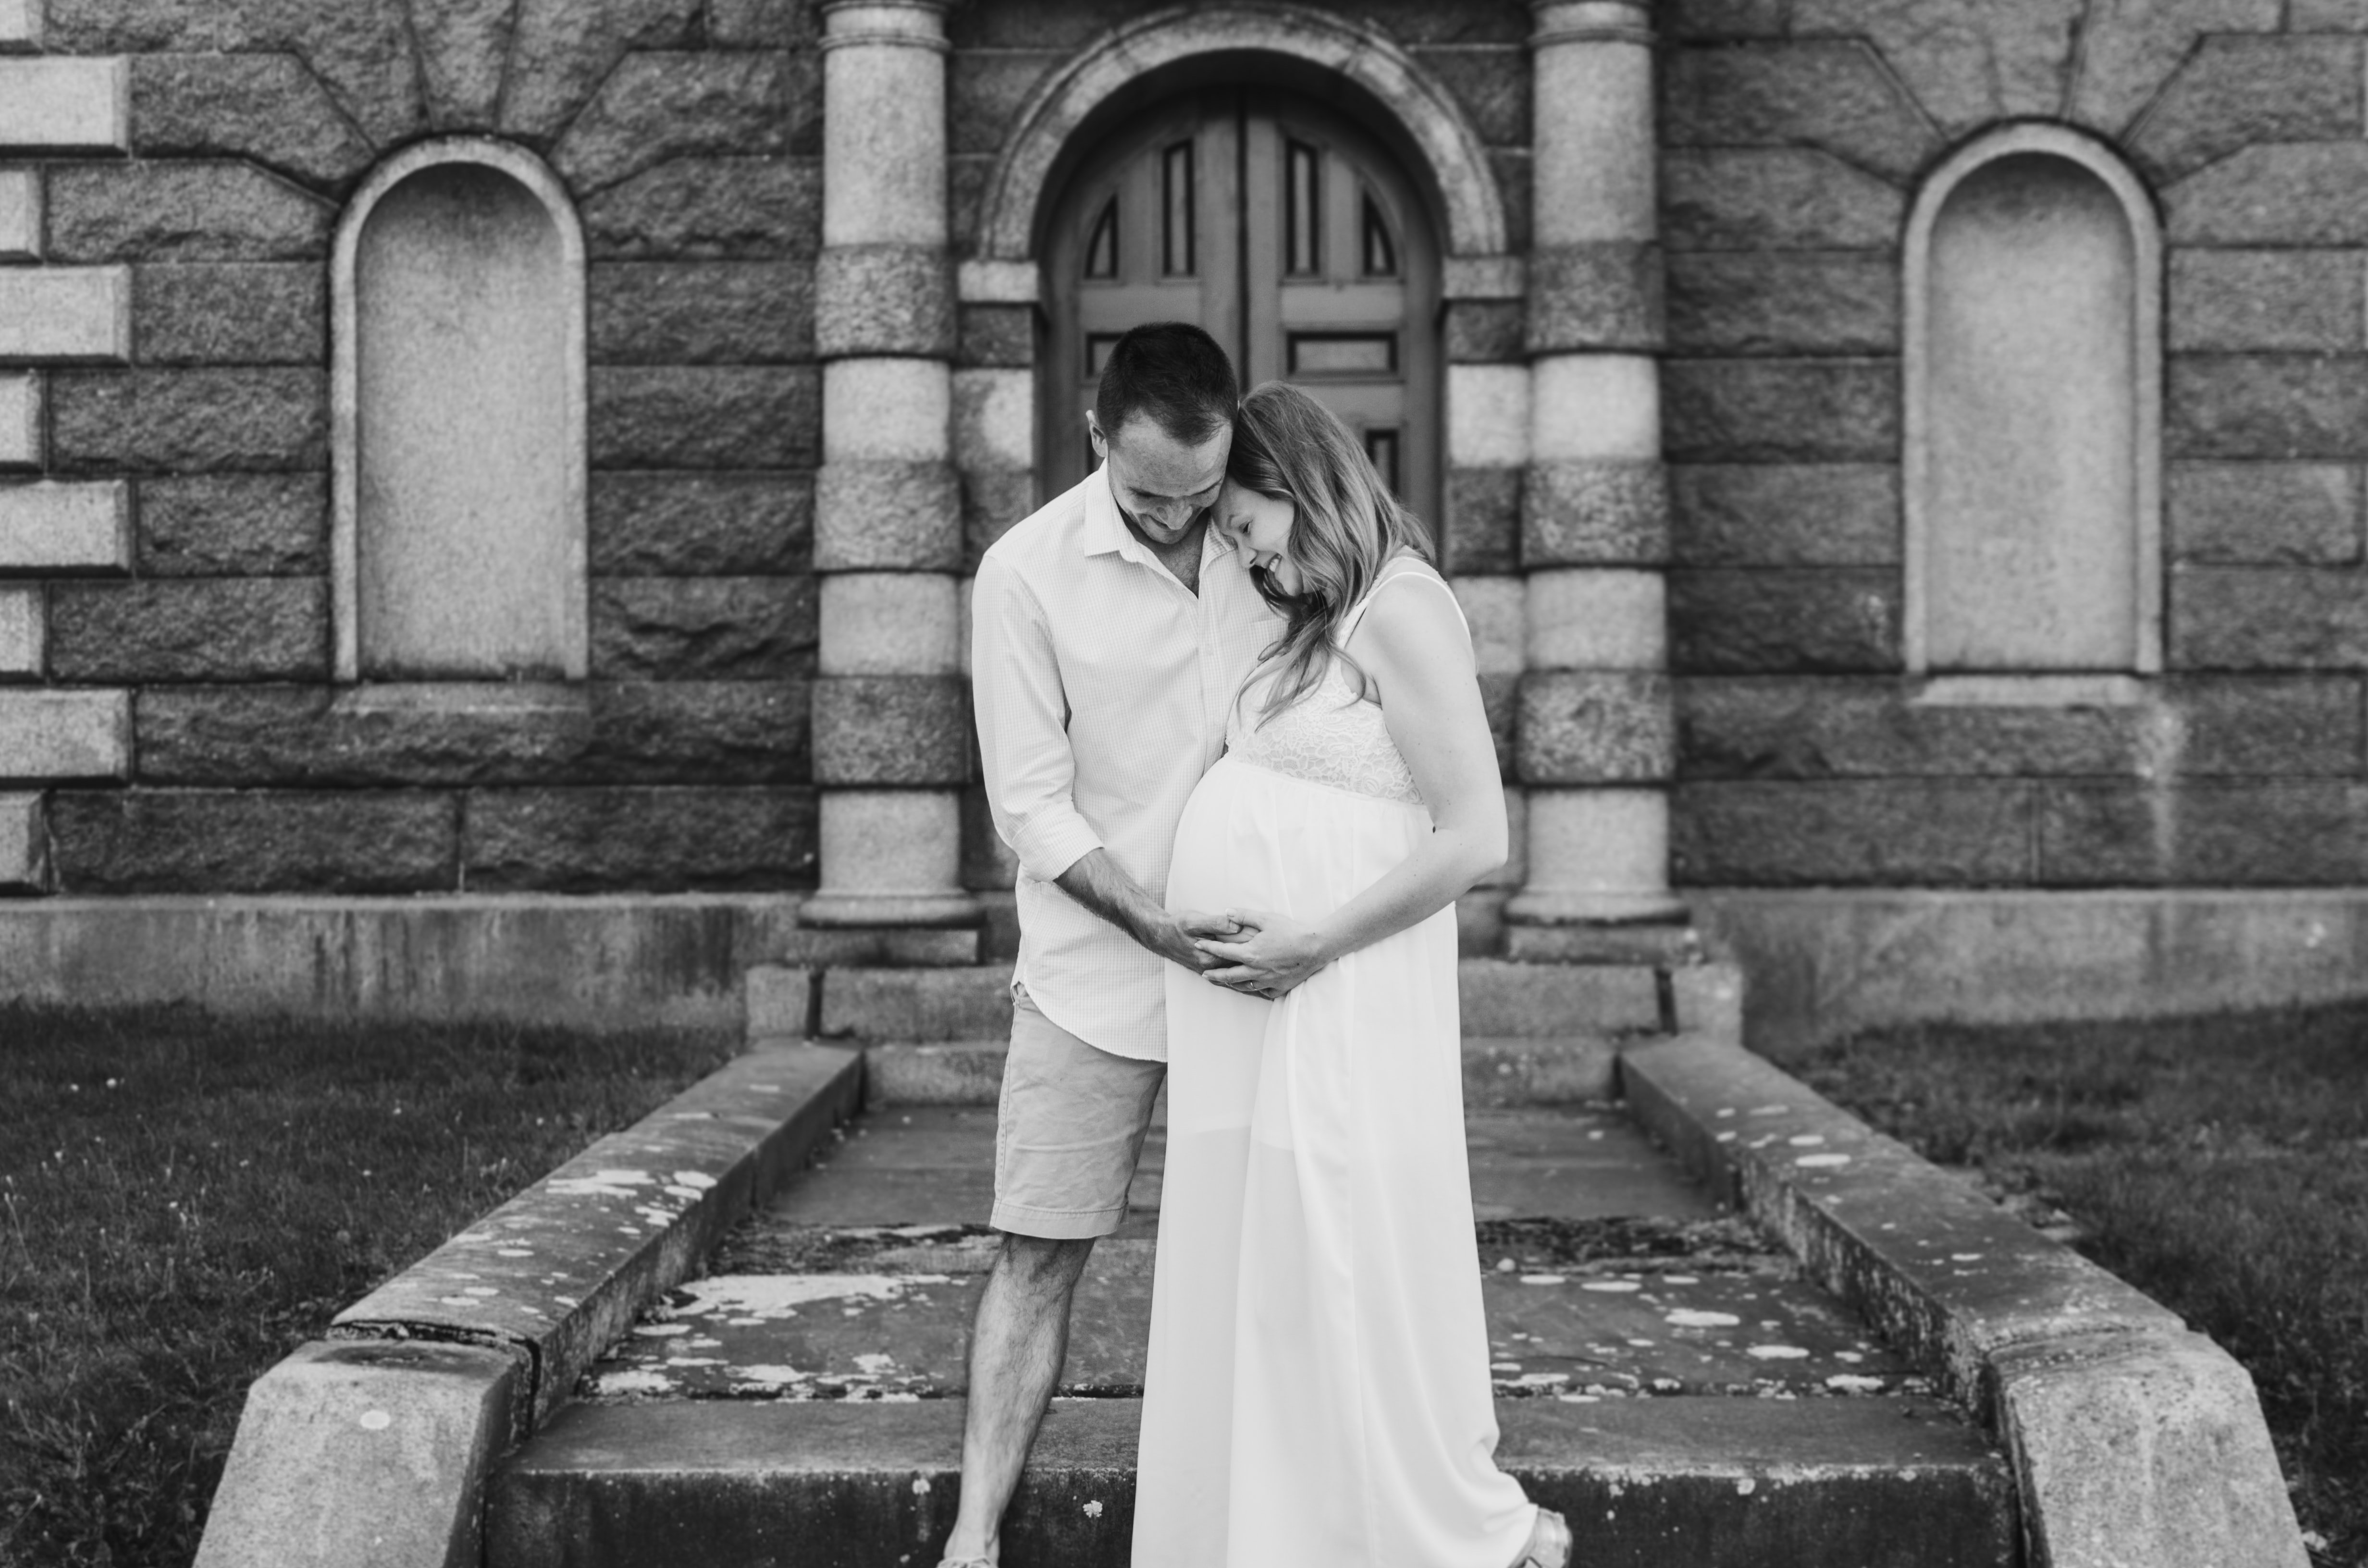 OP was an excited dad-to-be who was soon swept by a wave of doubts concerning his pregnant wife | Photo: Unsplash